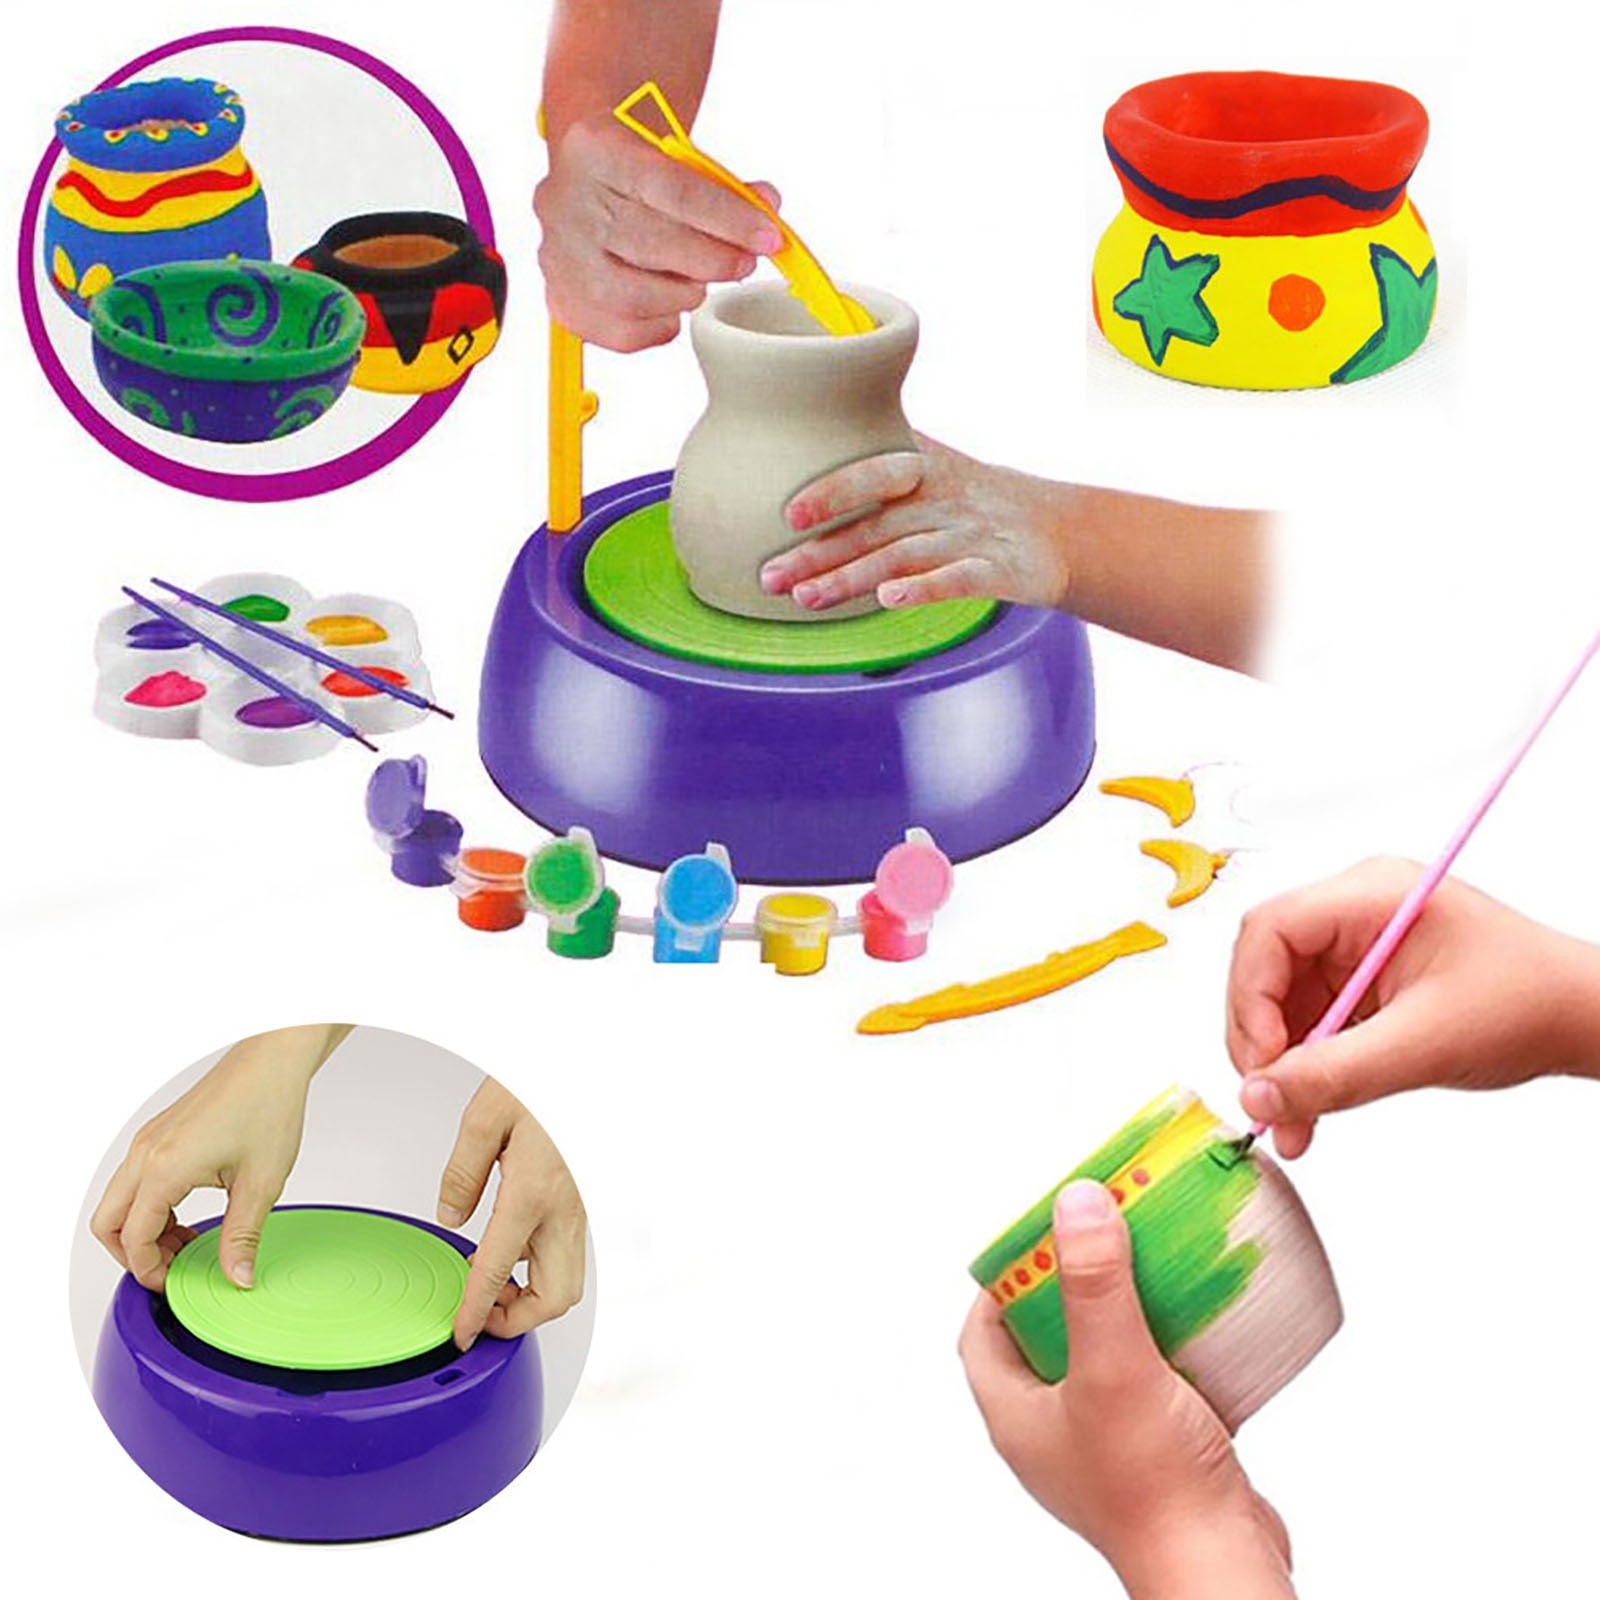  Insnug Mini Kids Pottery Wheel: Complete Painting Kit for  Beginners with Modeling Clay and Sculpting Tools, Arts & Crafts Small  Banding Wheel for Pottery, Tiny Pottery Wheel for Kids Age 8-12